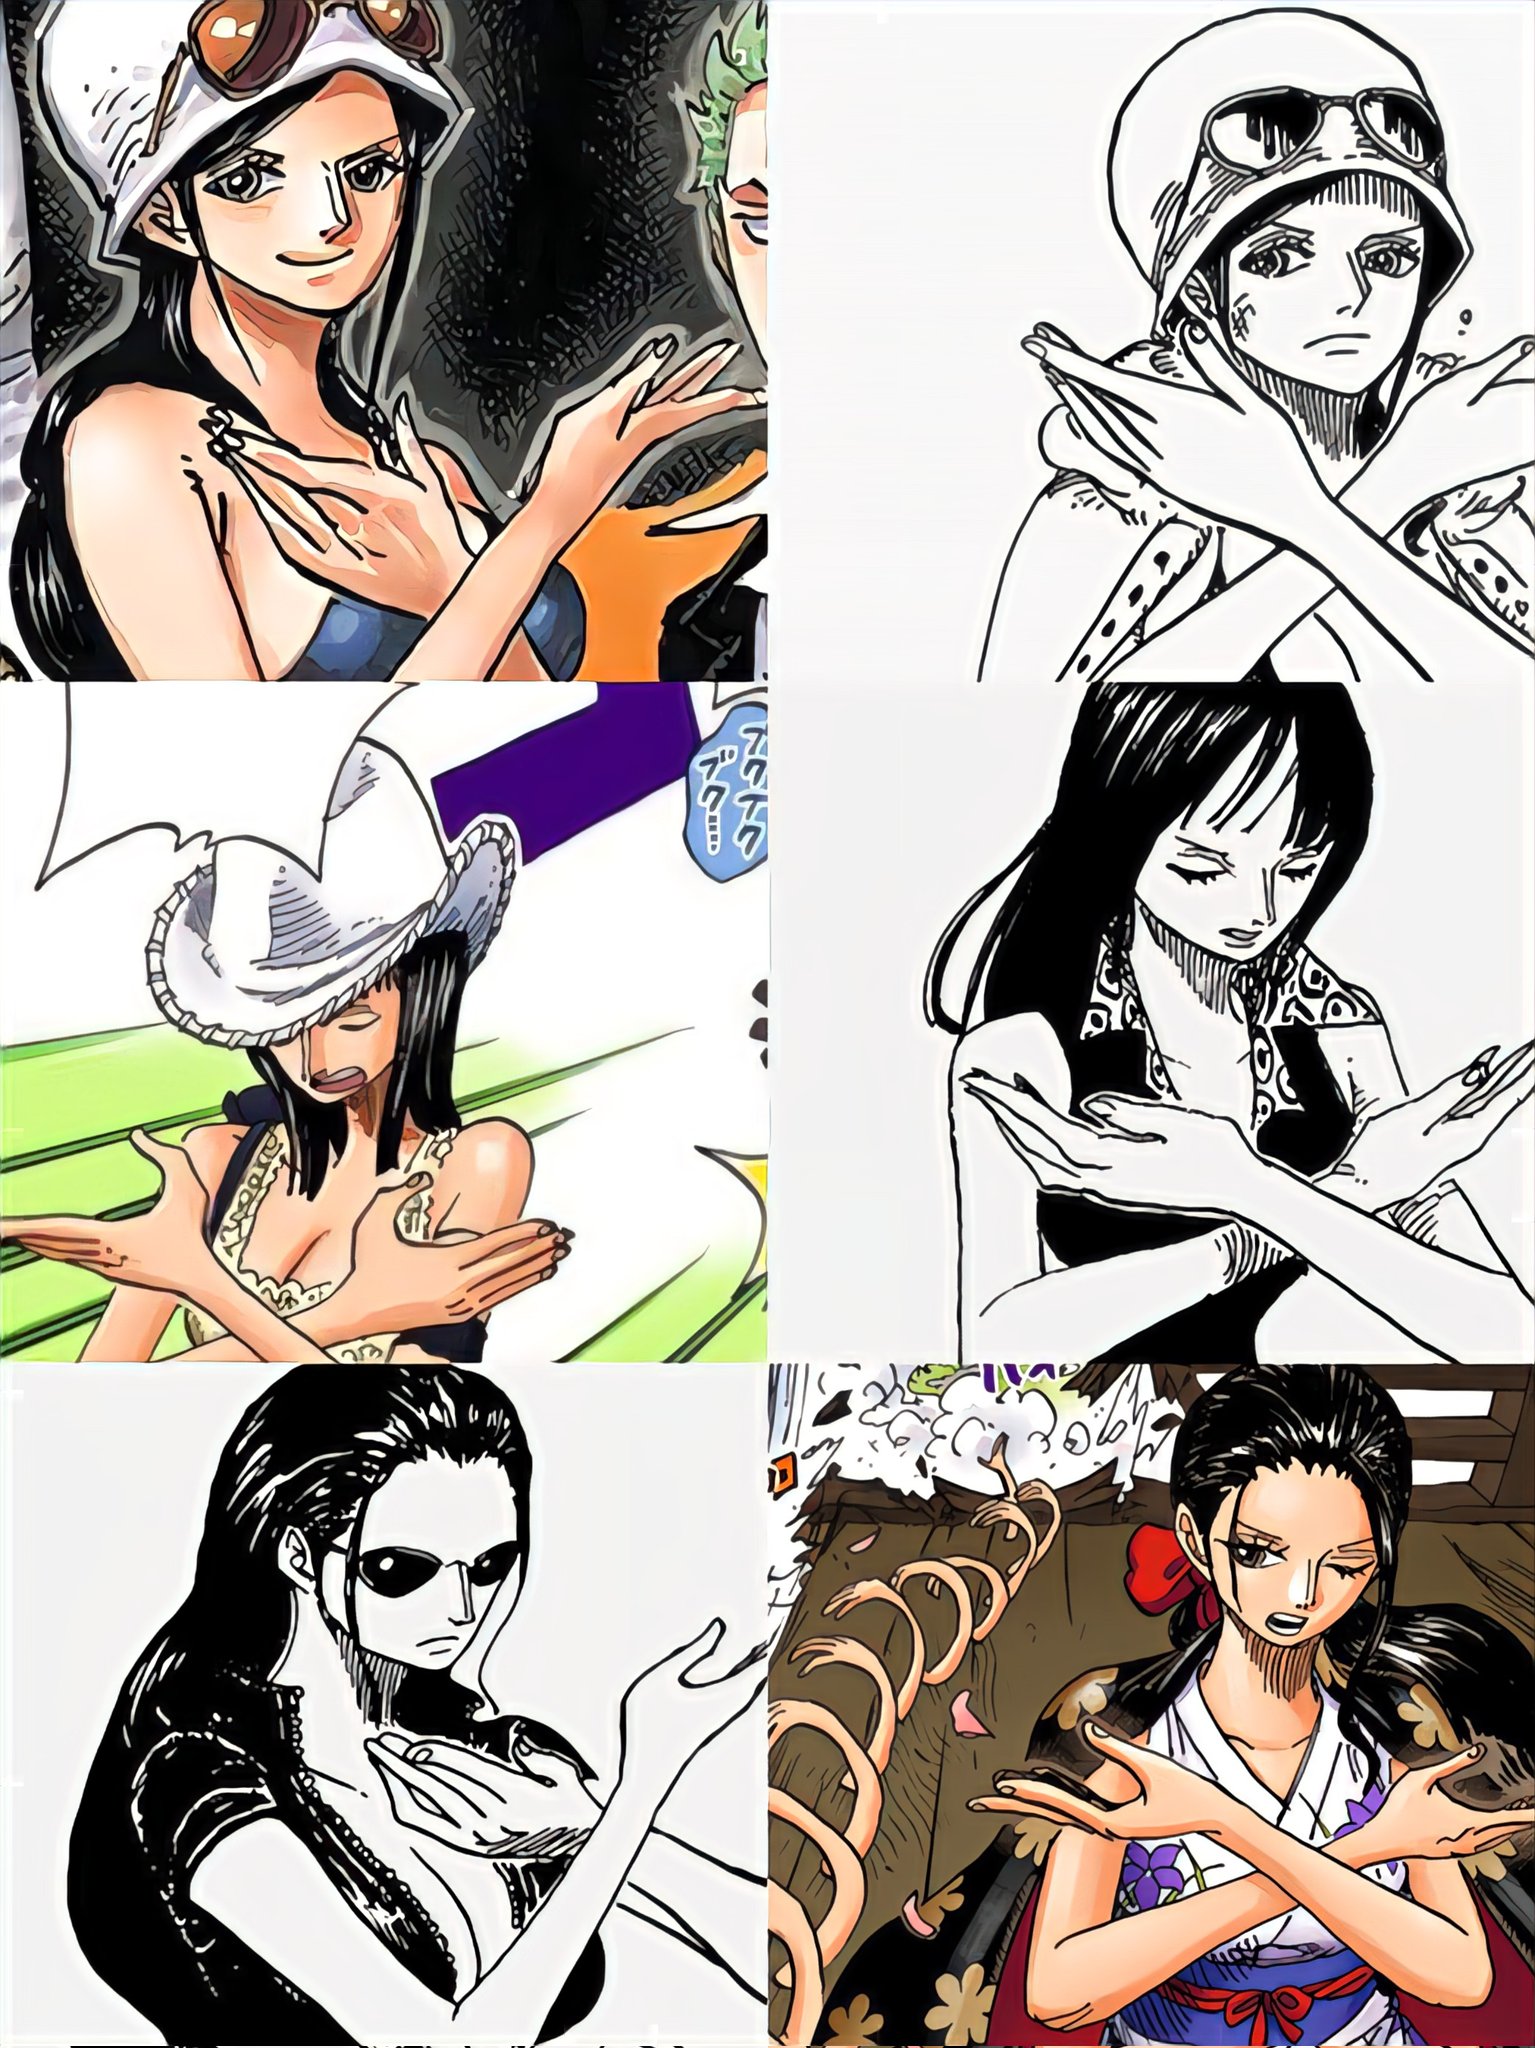 Nico Robin Content on X: this pose belongs only to nico robín.🔥  t.conJWhSw9Lp3  X